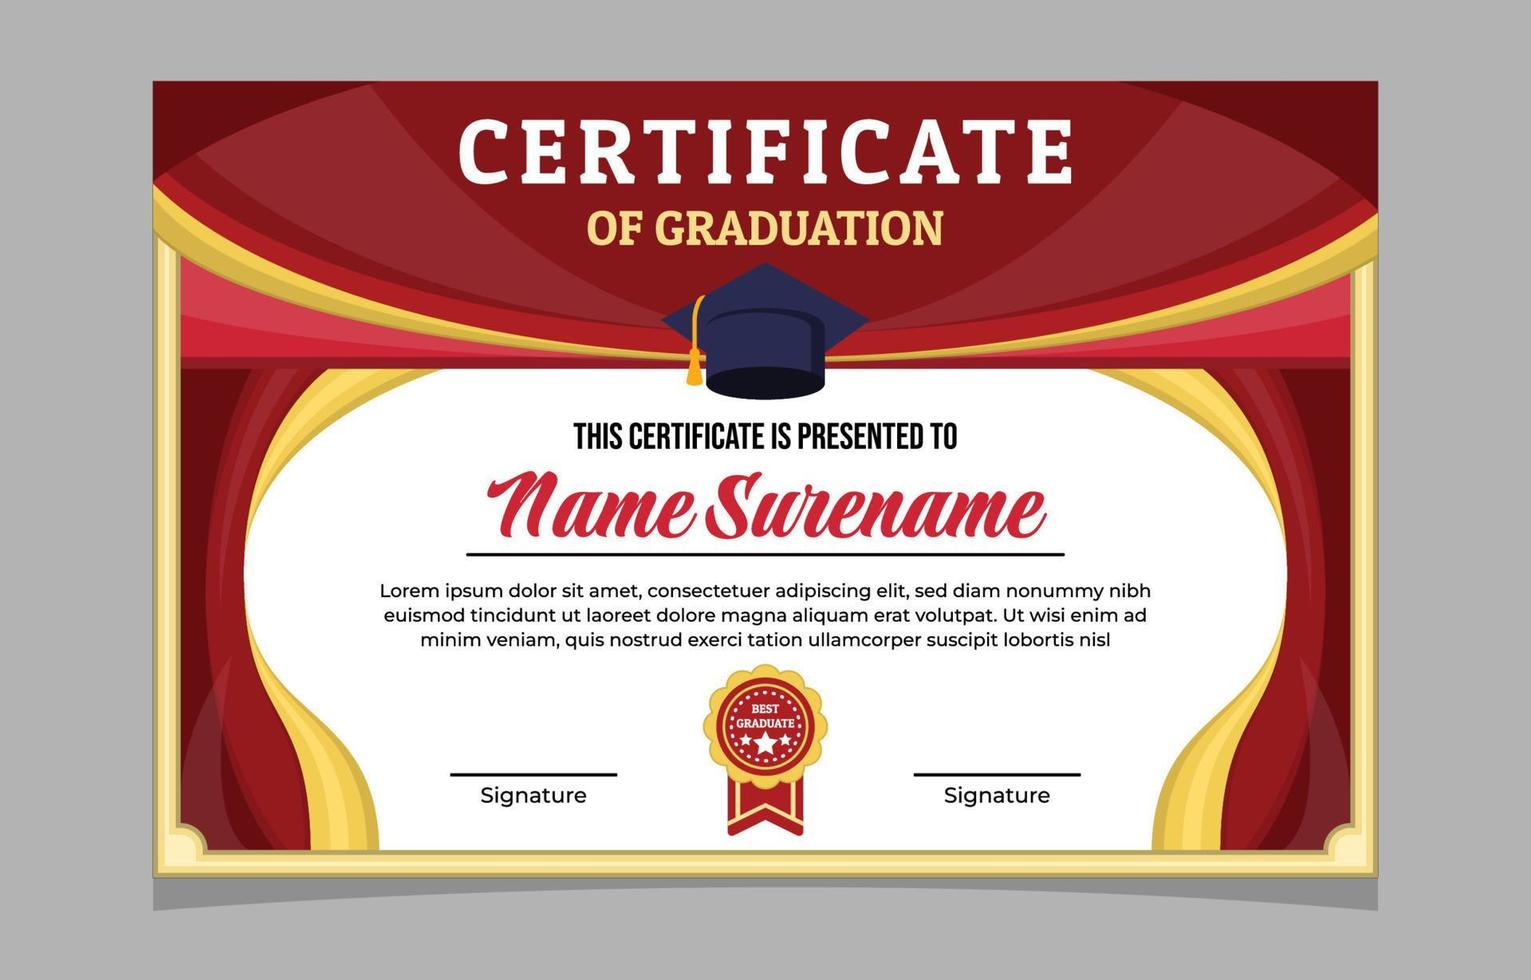 Formal Curtain Styled Graduation Certificate Template vector